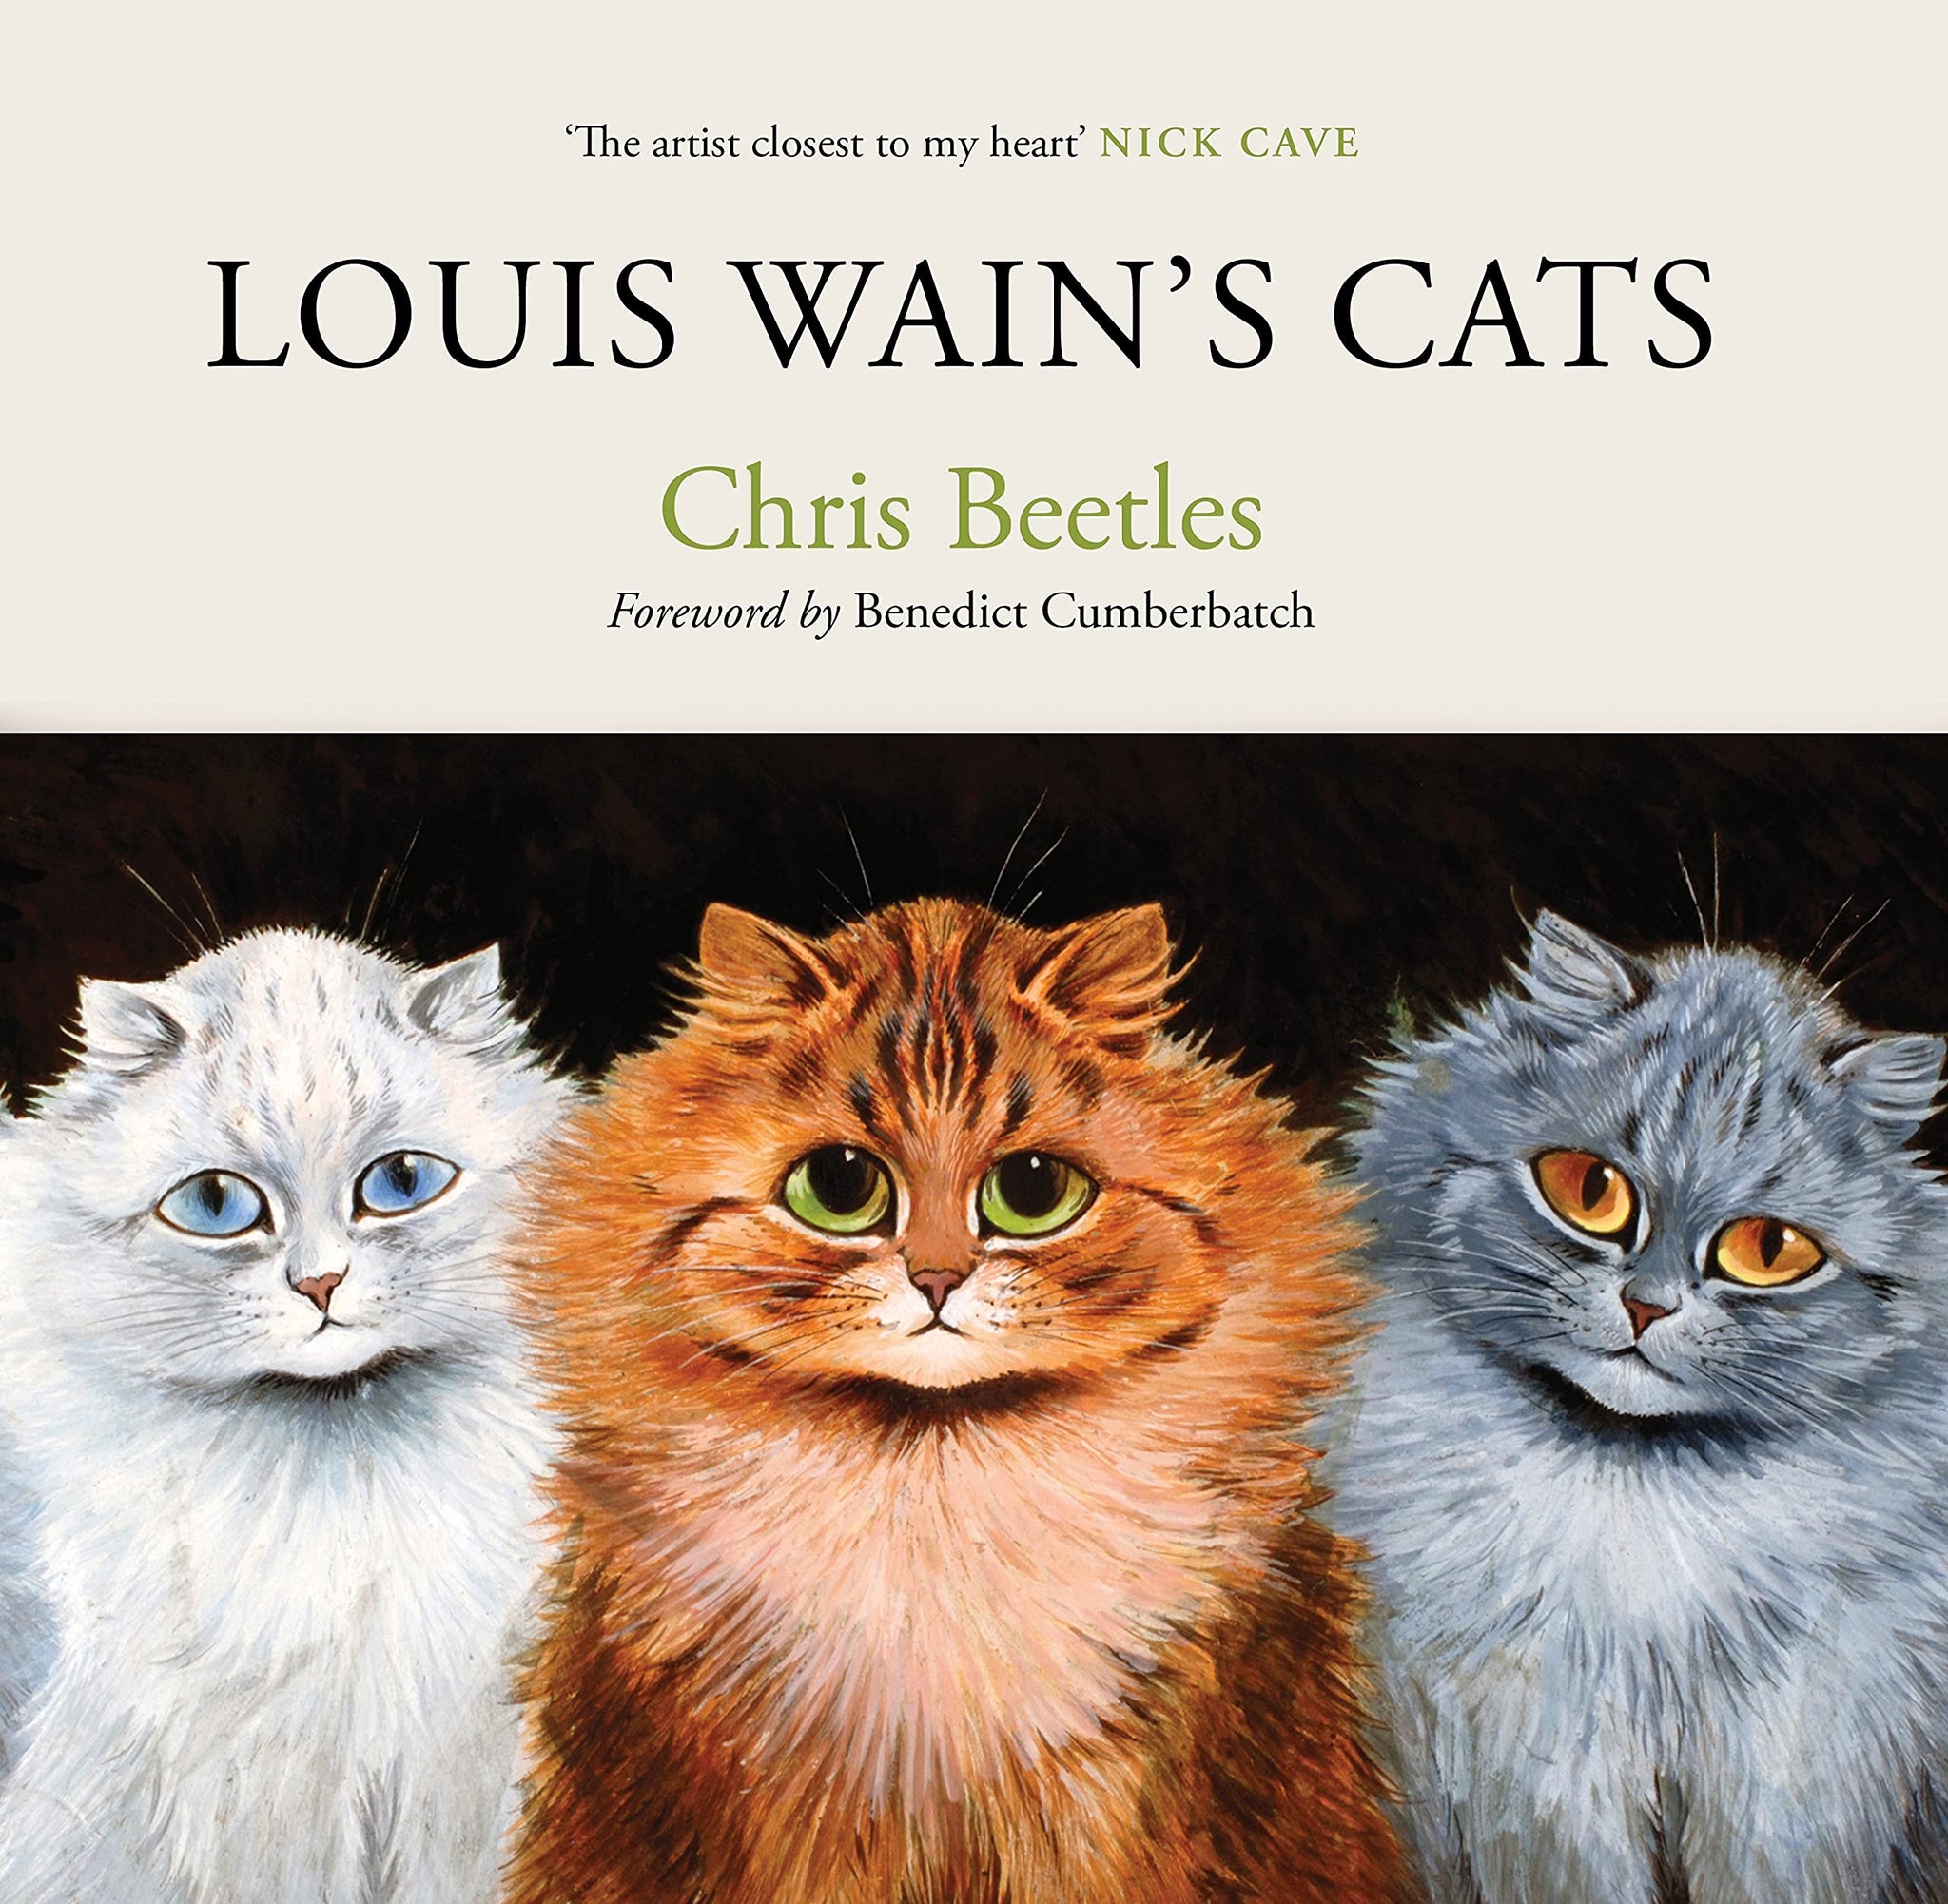 Louis Wain's Cats by Chris Beetles